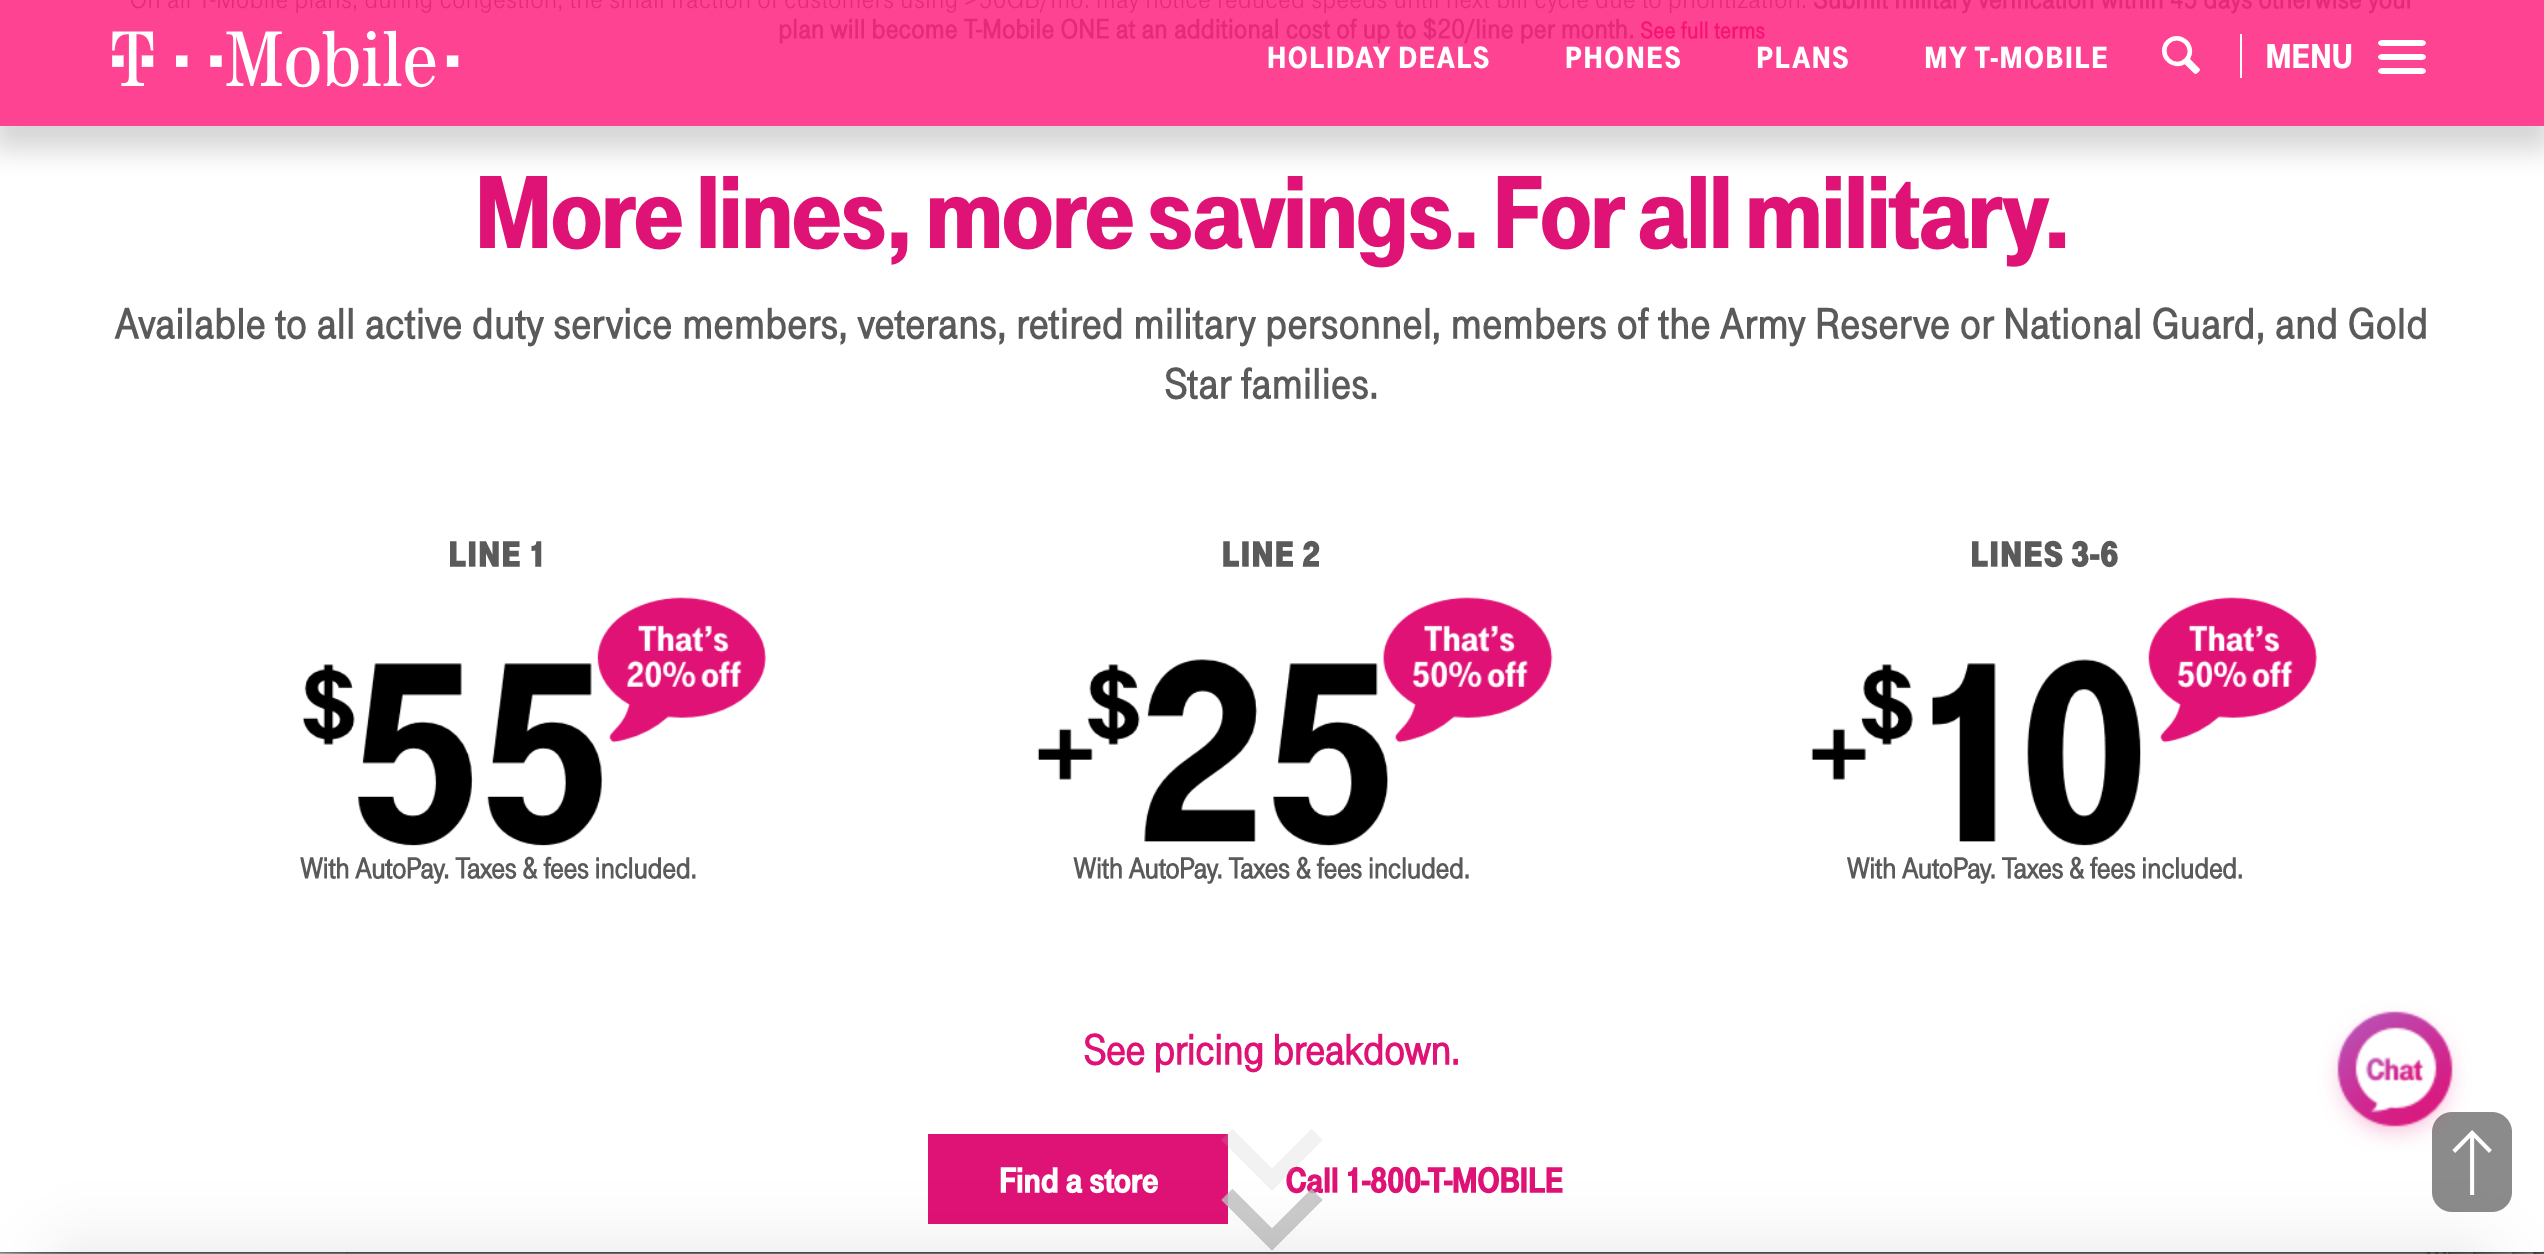 one-culture-t-mobile-1-plan